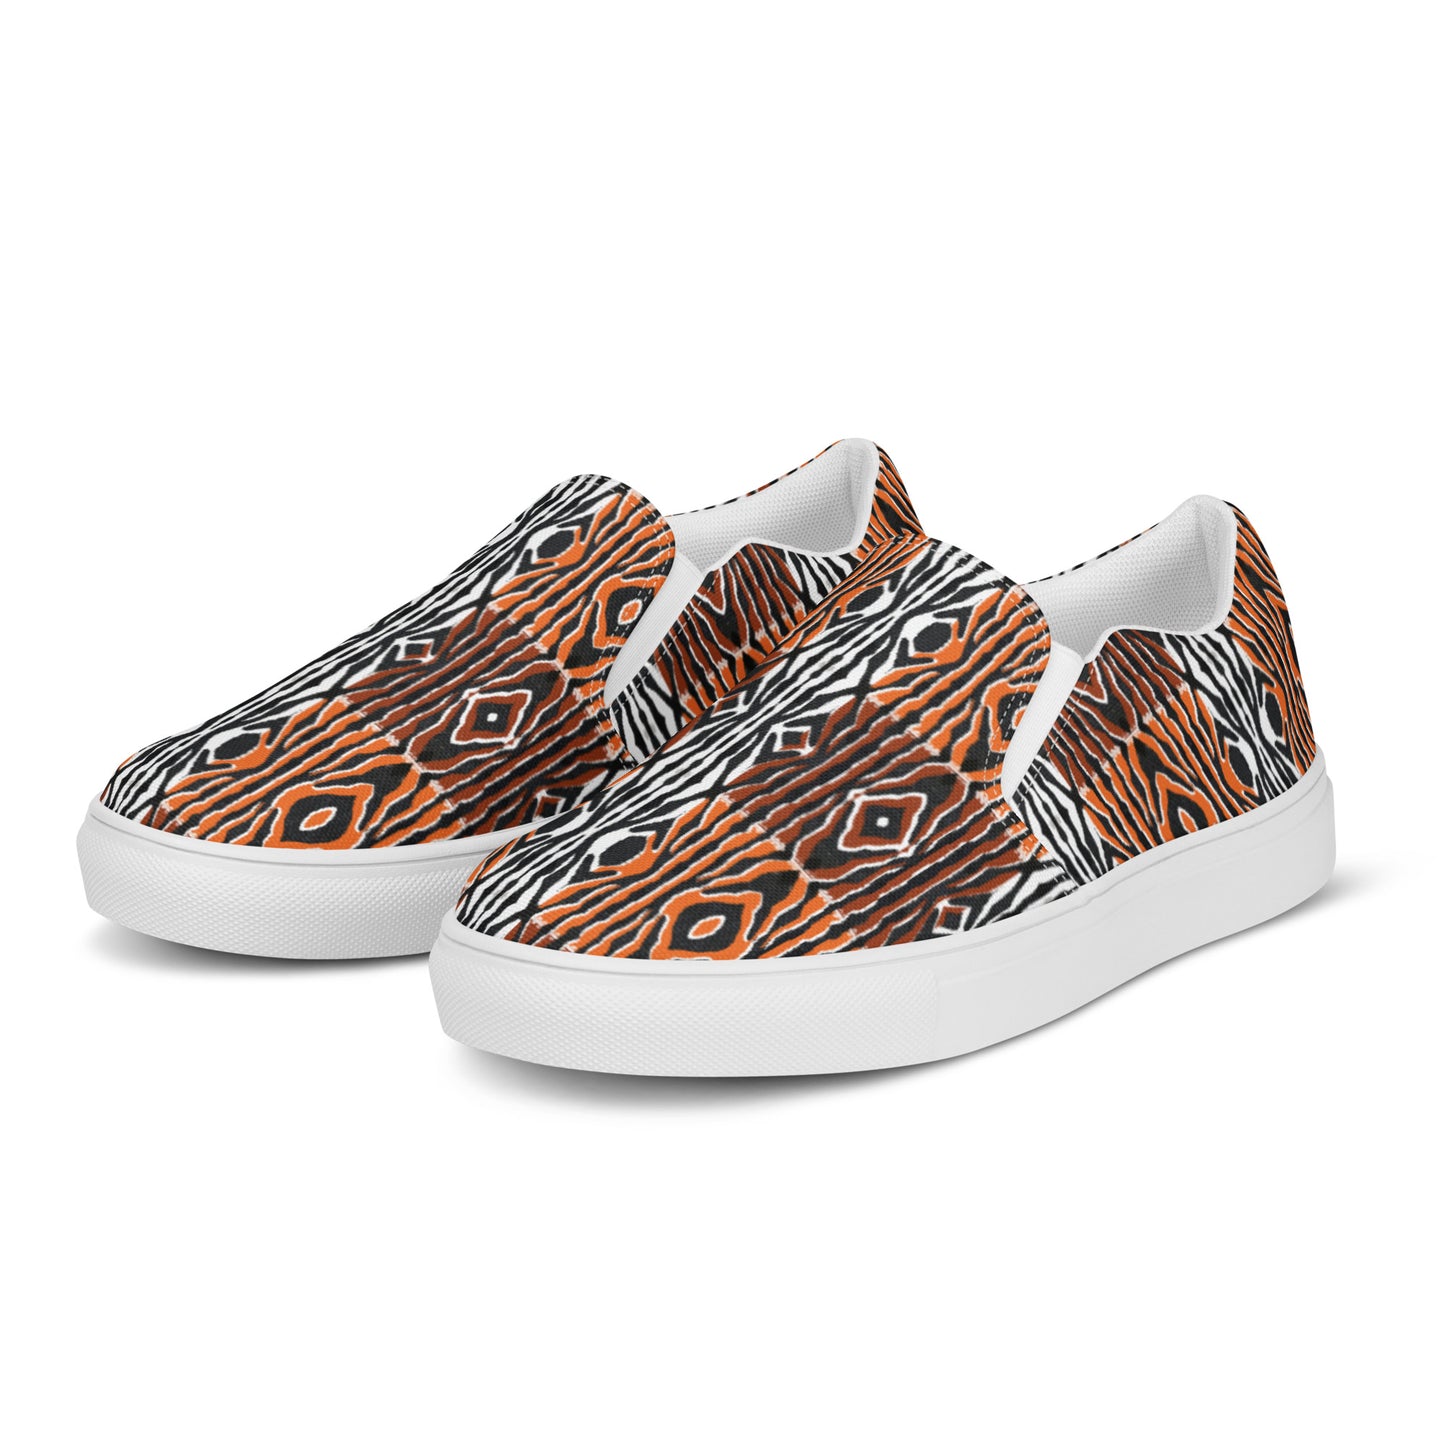 QUAGGA - Women's canvas trainers without laces